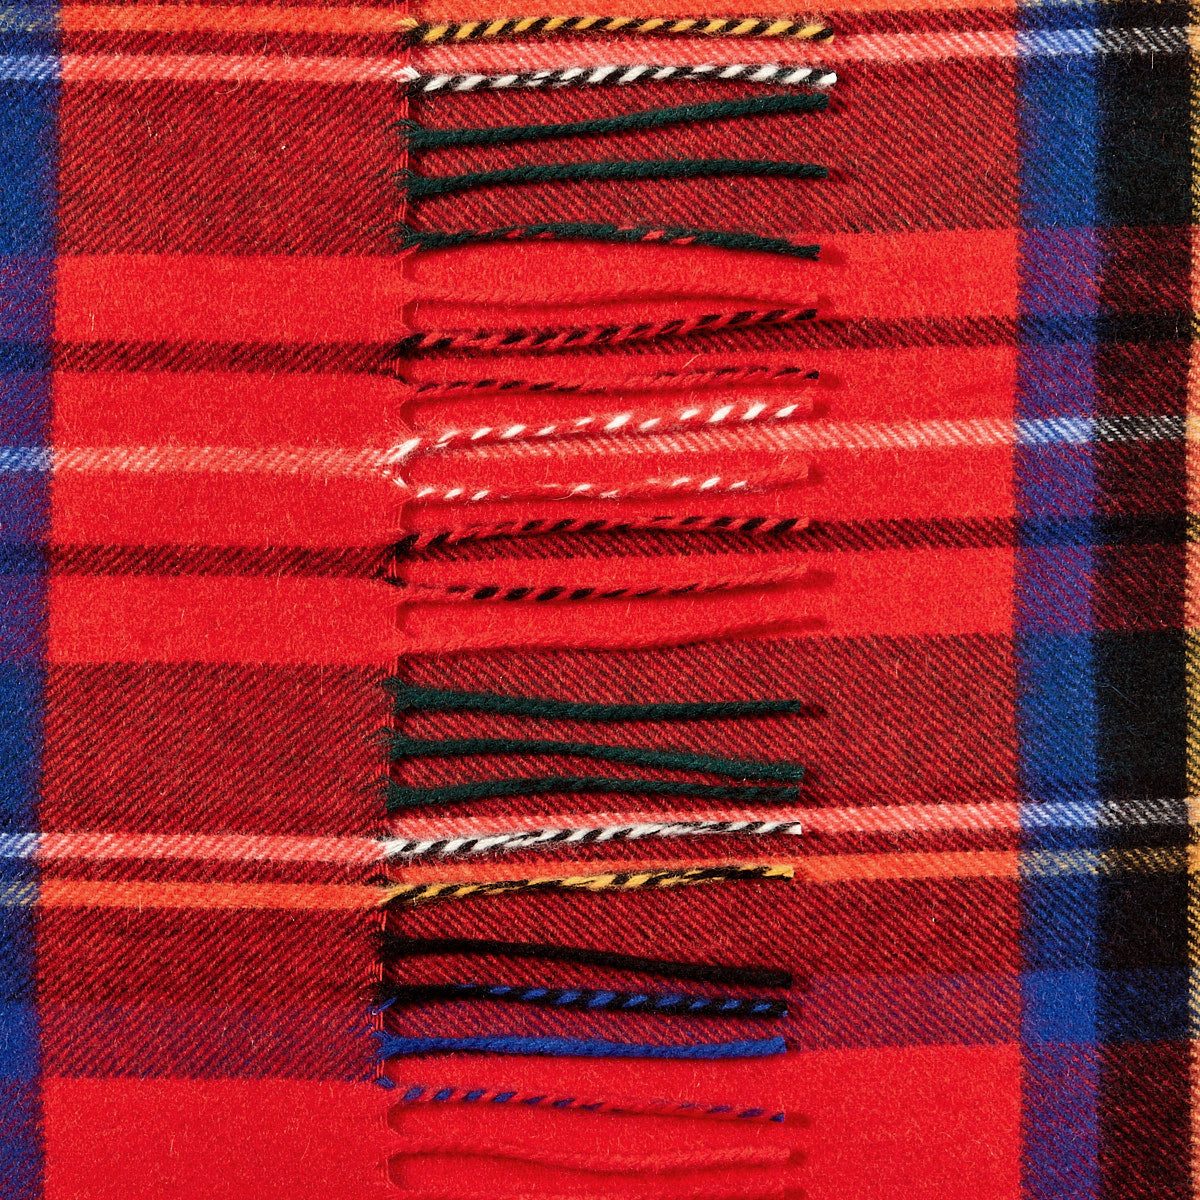 A close-up of a Johnstons of Elgin Red Checked Royal Stewart Cashmere Scarf.